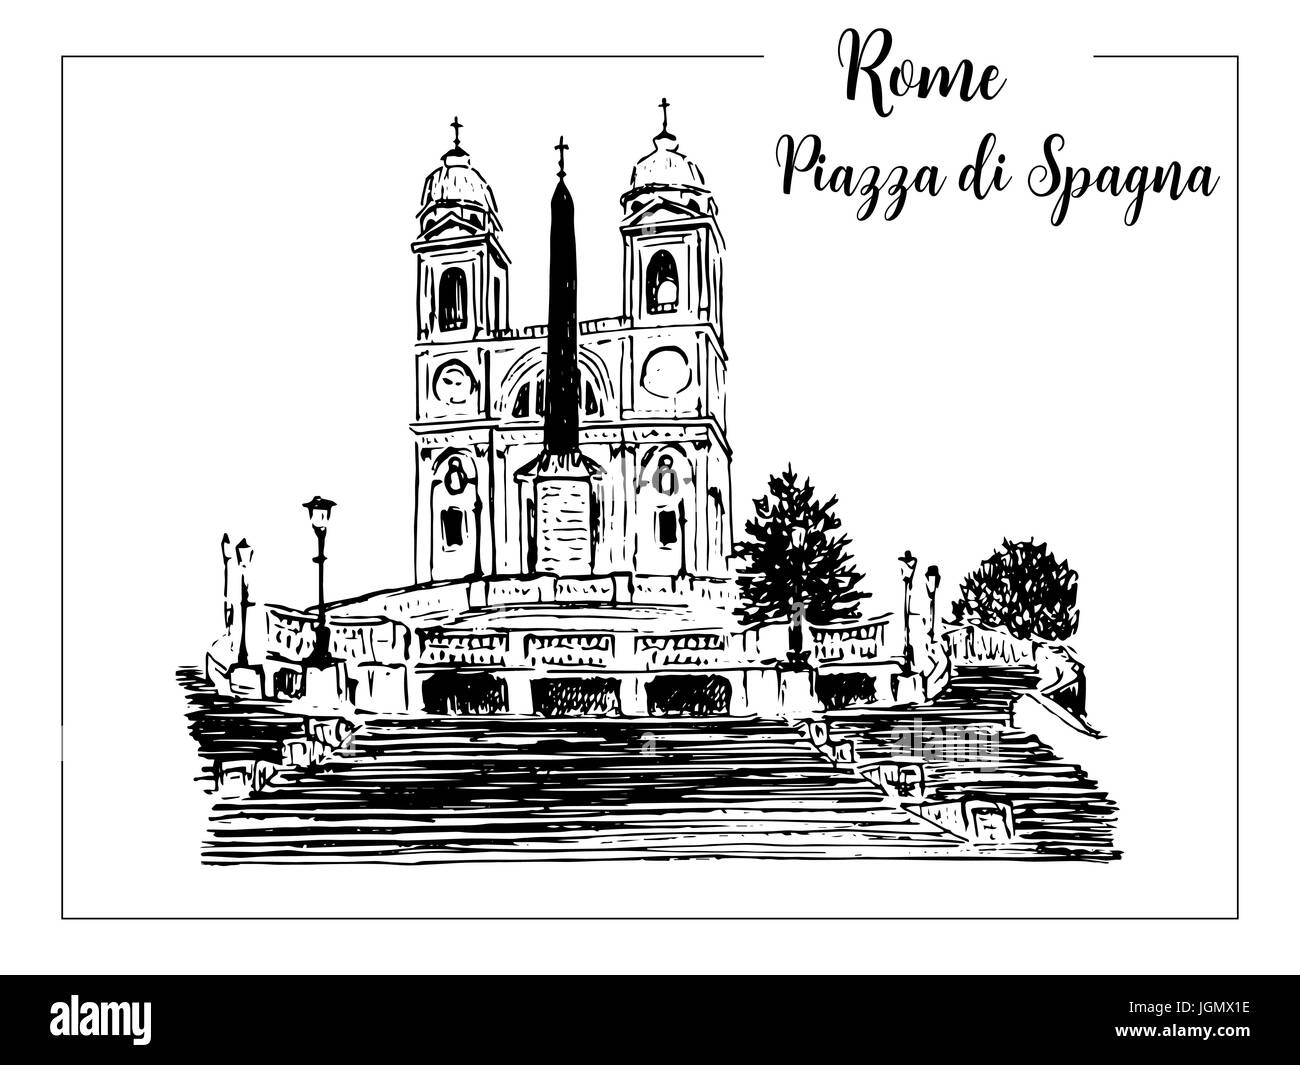 Piazza di Spagna or Spanish Steps. Rome architectural symbol. Beautiful hand drawn vector sketch illustration. Italy. For prints, textile, advertising Stock Vector